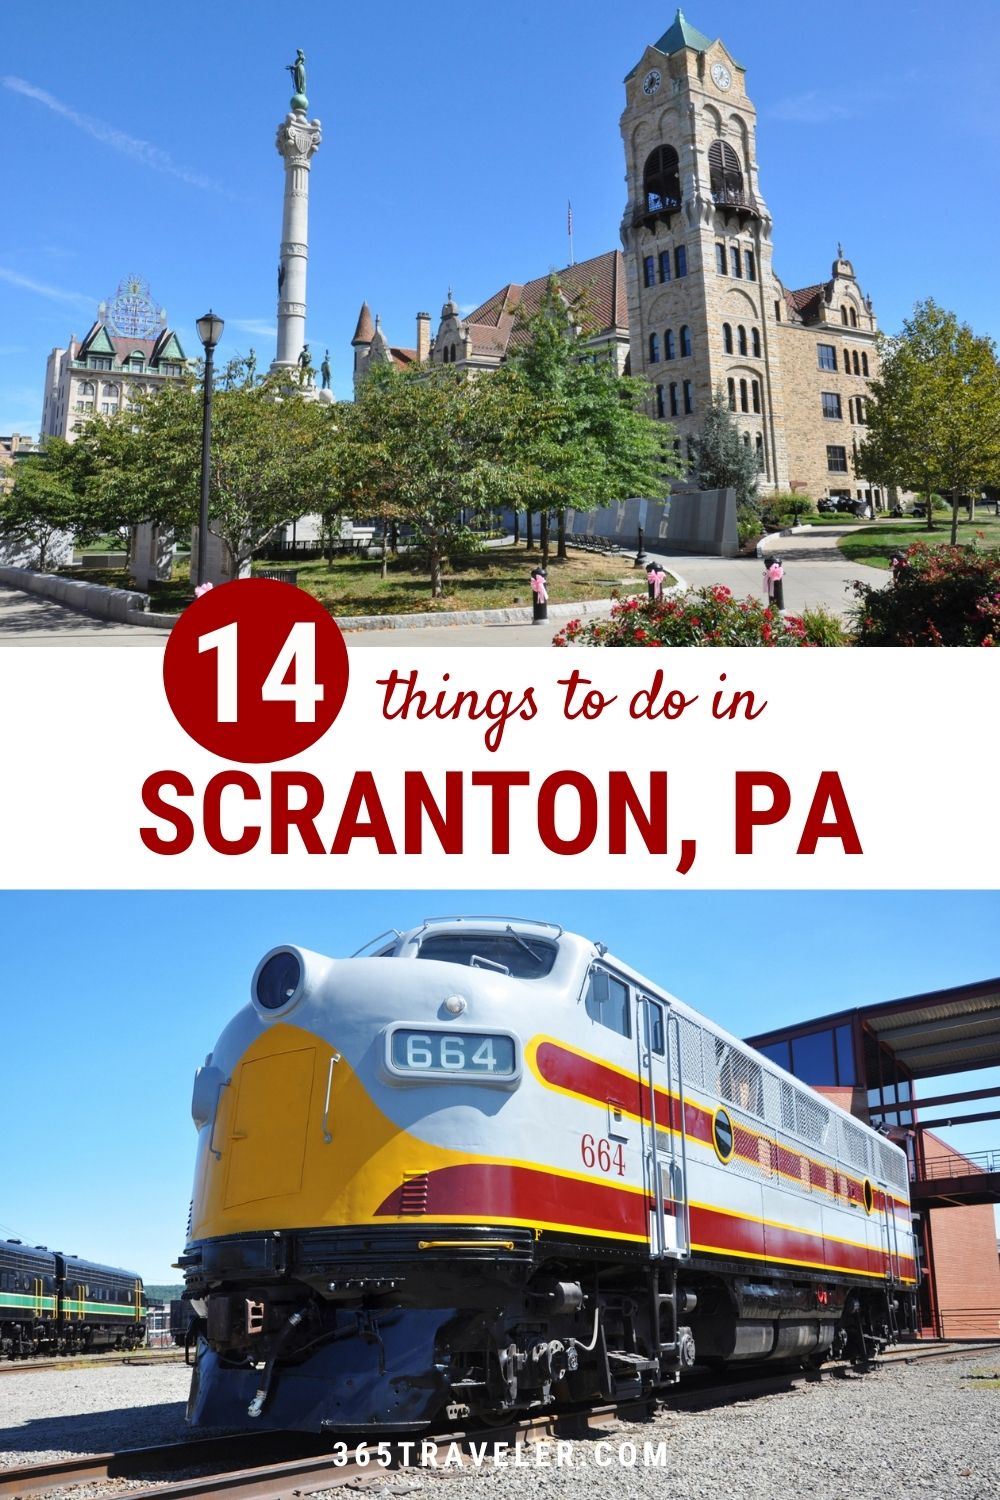 14 FUN THINGS TO DO IN SCRANTON PA YOU CAN'T MISS